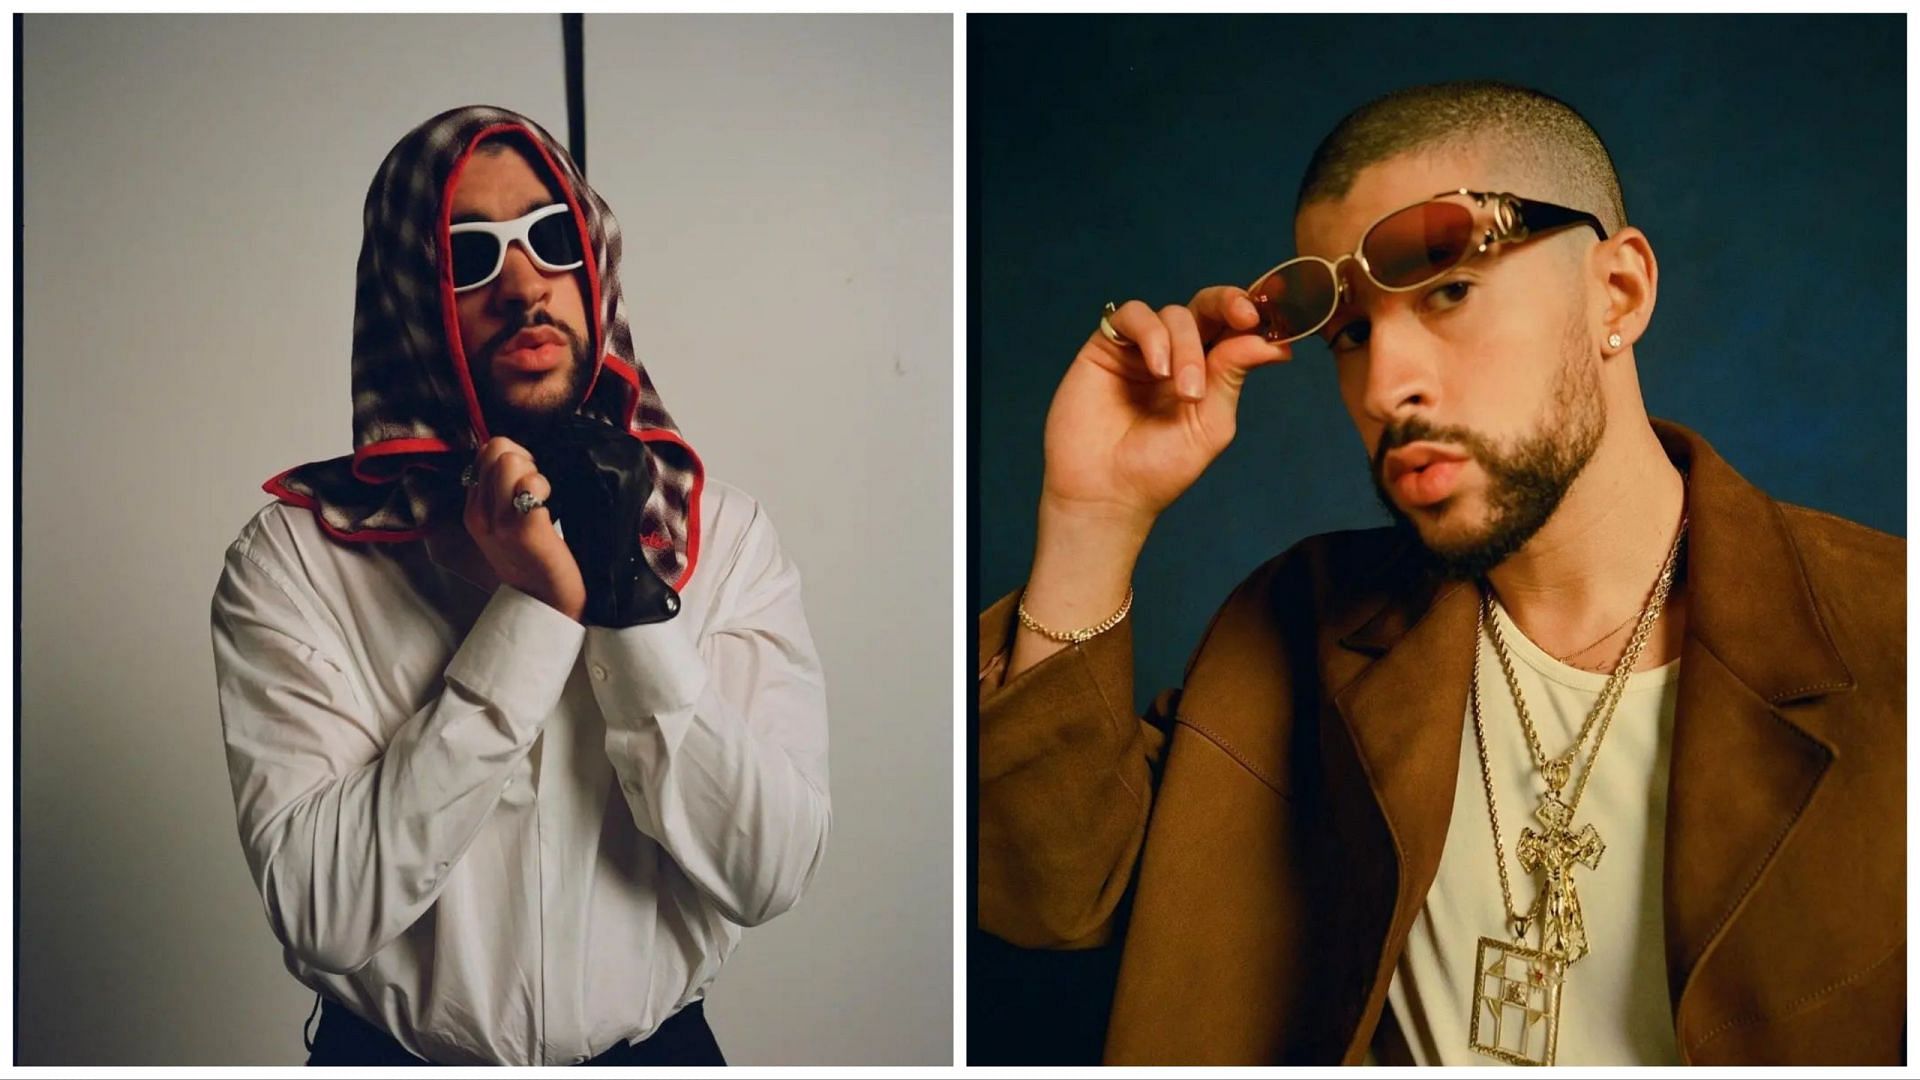 Bad Bunny - Most Wanted Tour - Night One in Austin at Moody Center